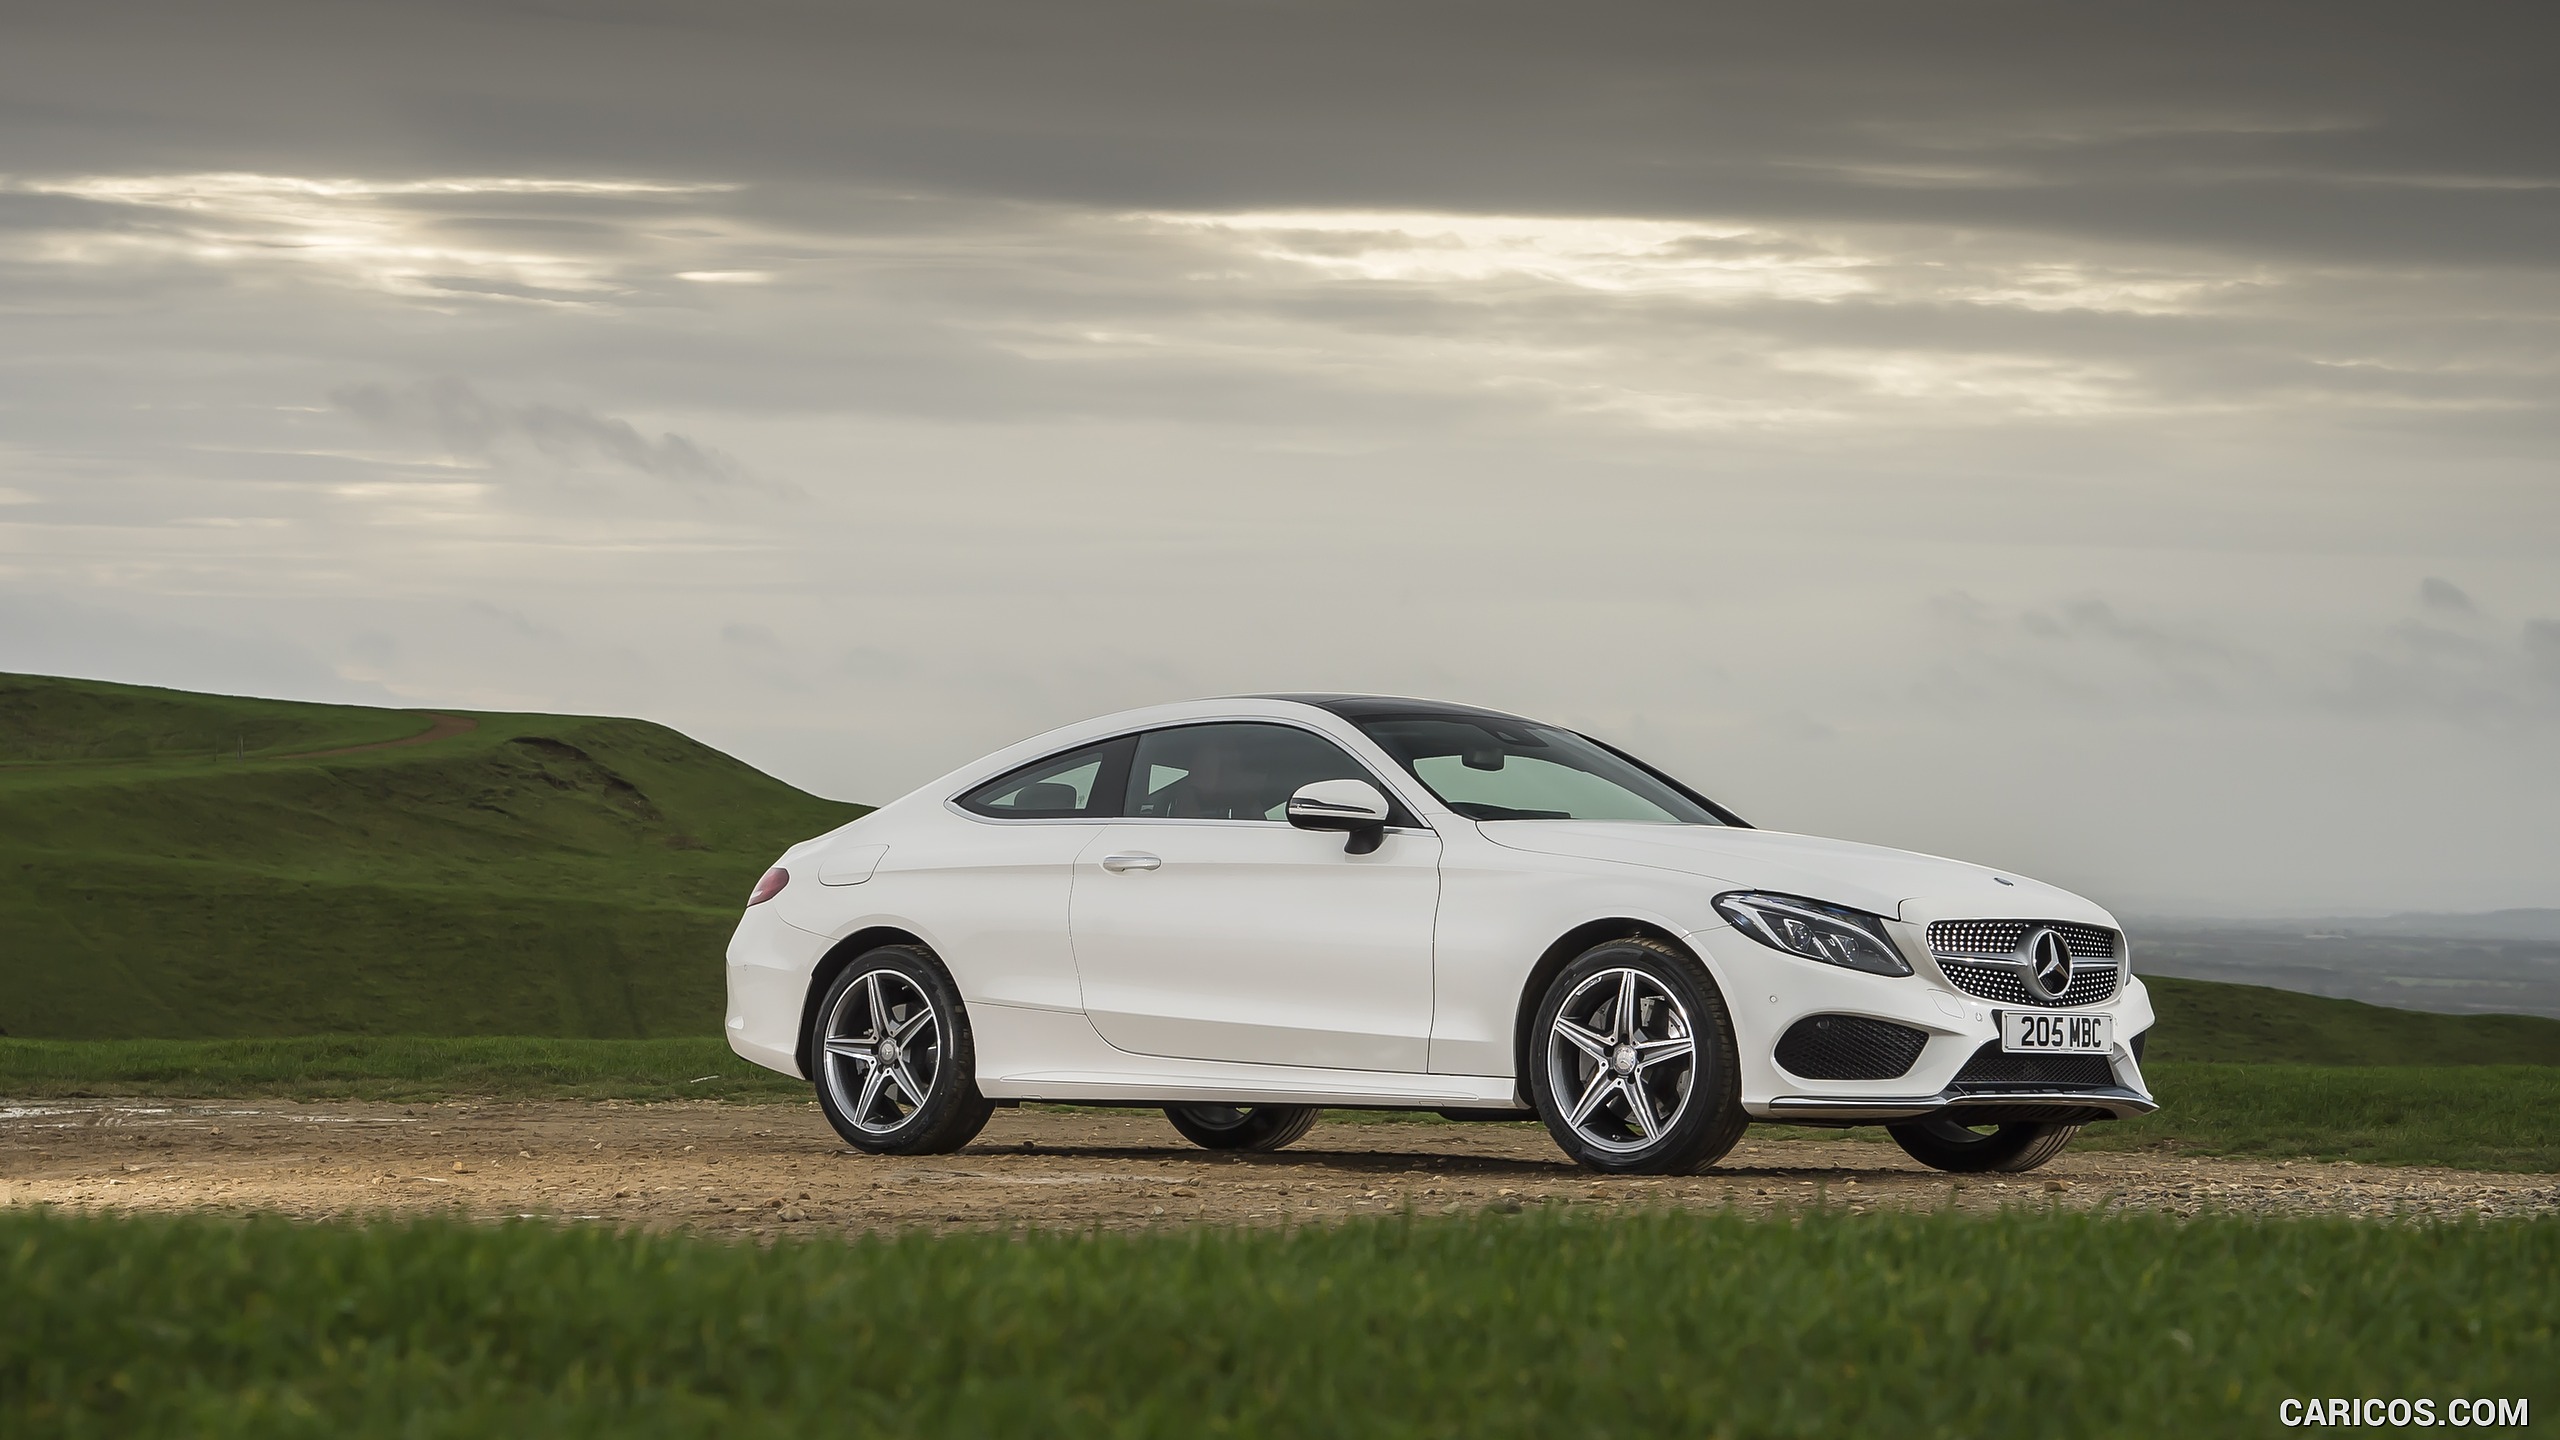 2017 Mercedes-Benz C-Class Coupe (UK-Spec) - Side, #115 of 210